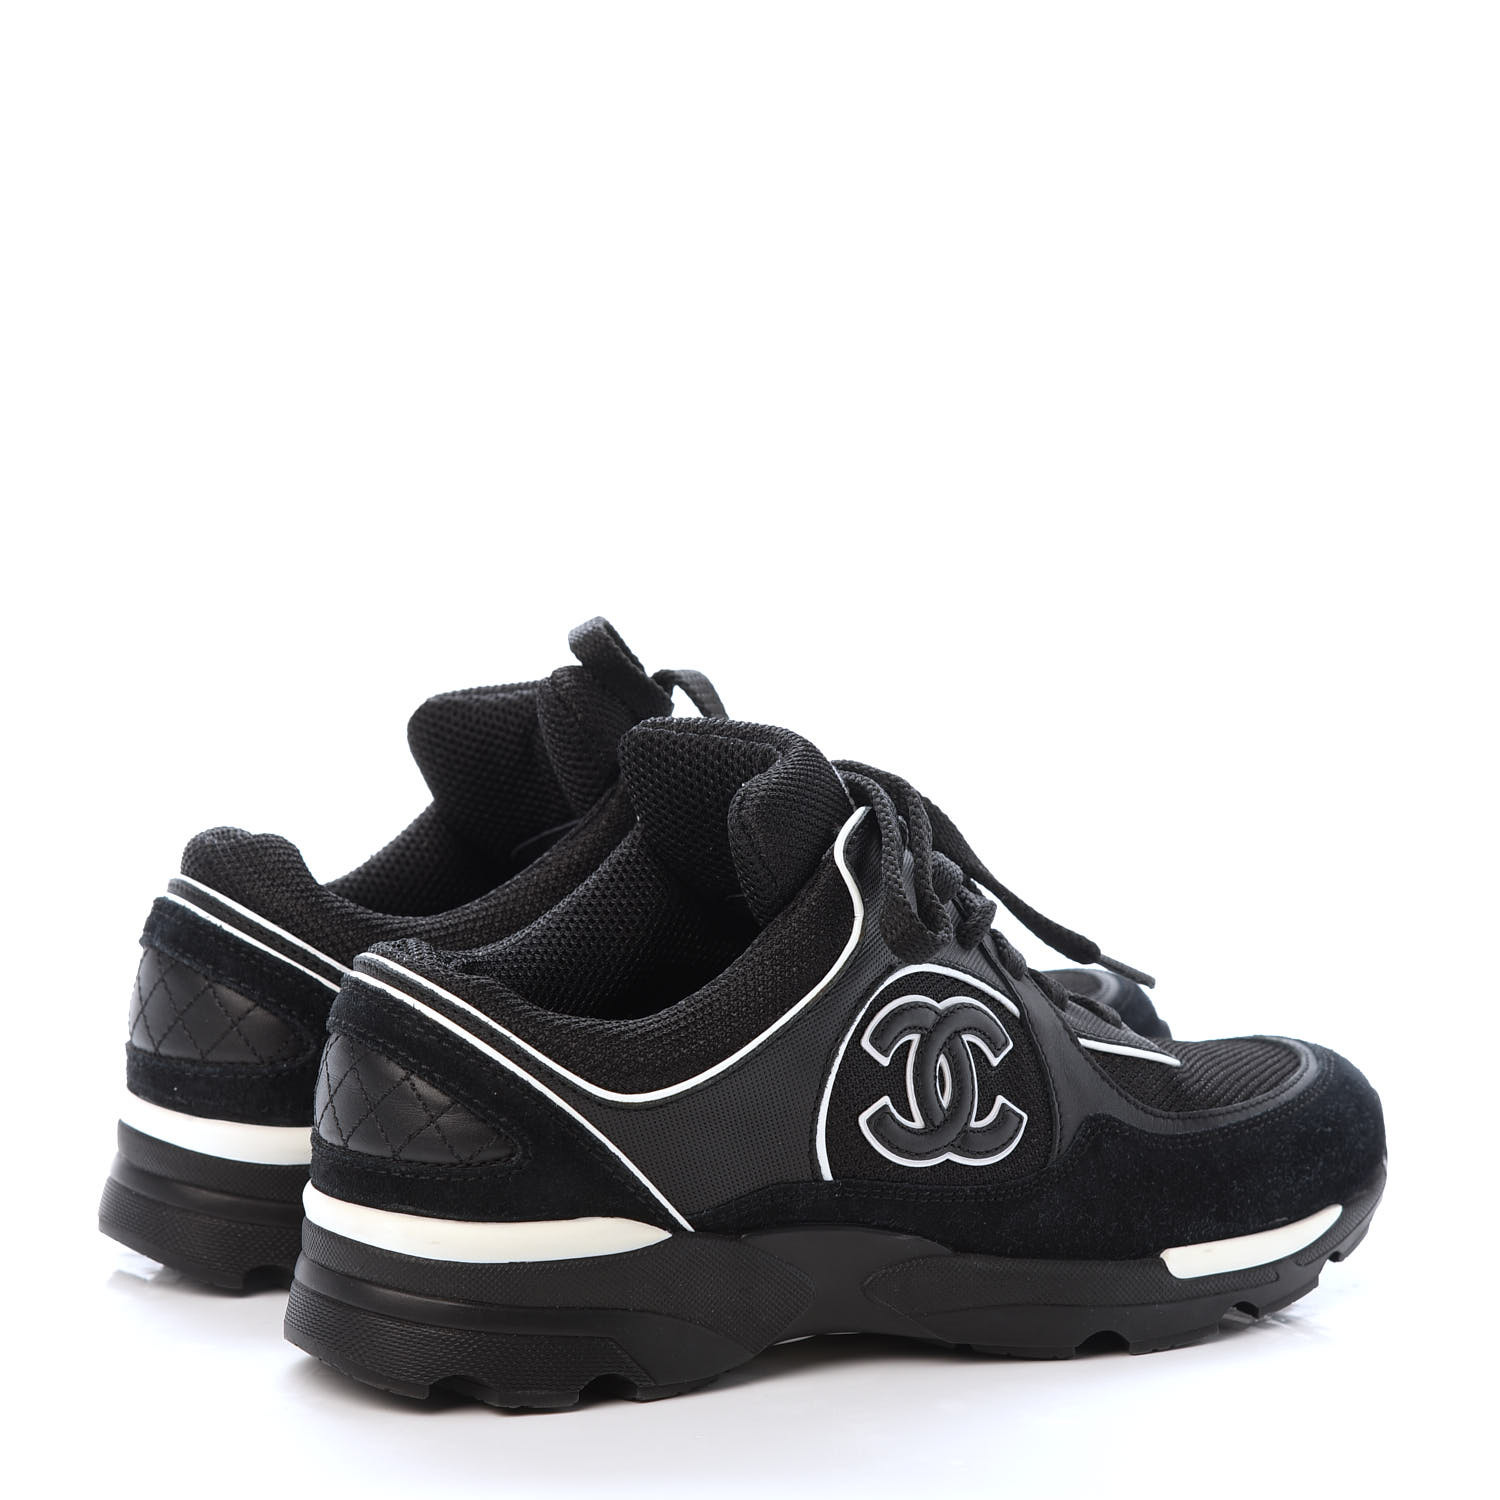 CHANEL Toile Suede Calfskin CC Sneakers 36 Black White 737135 ...